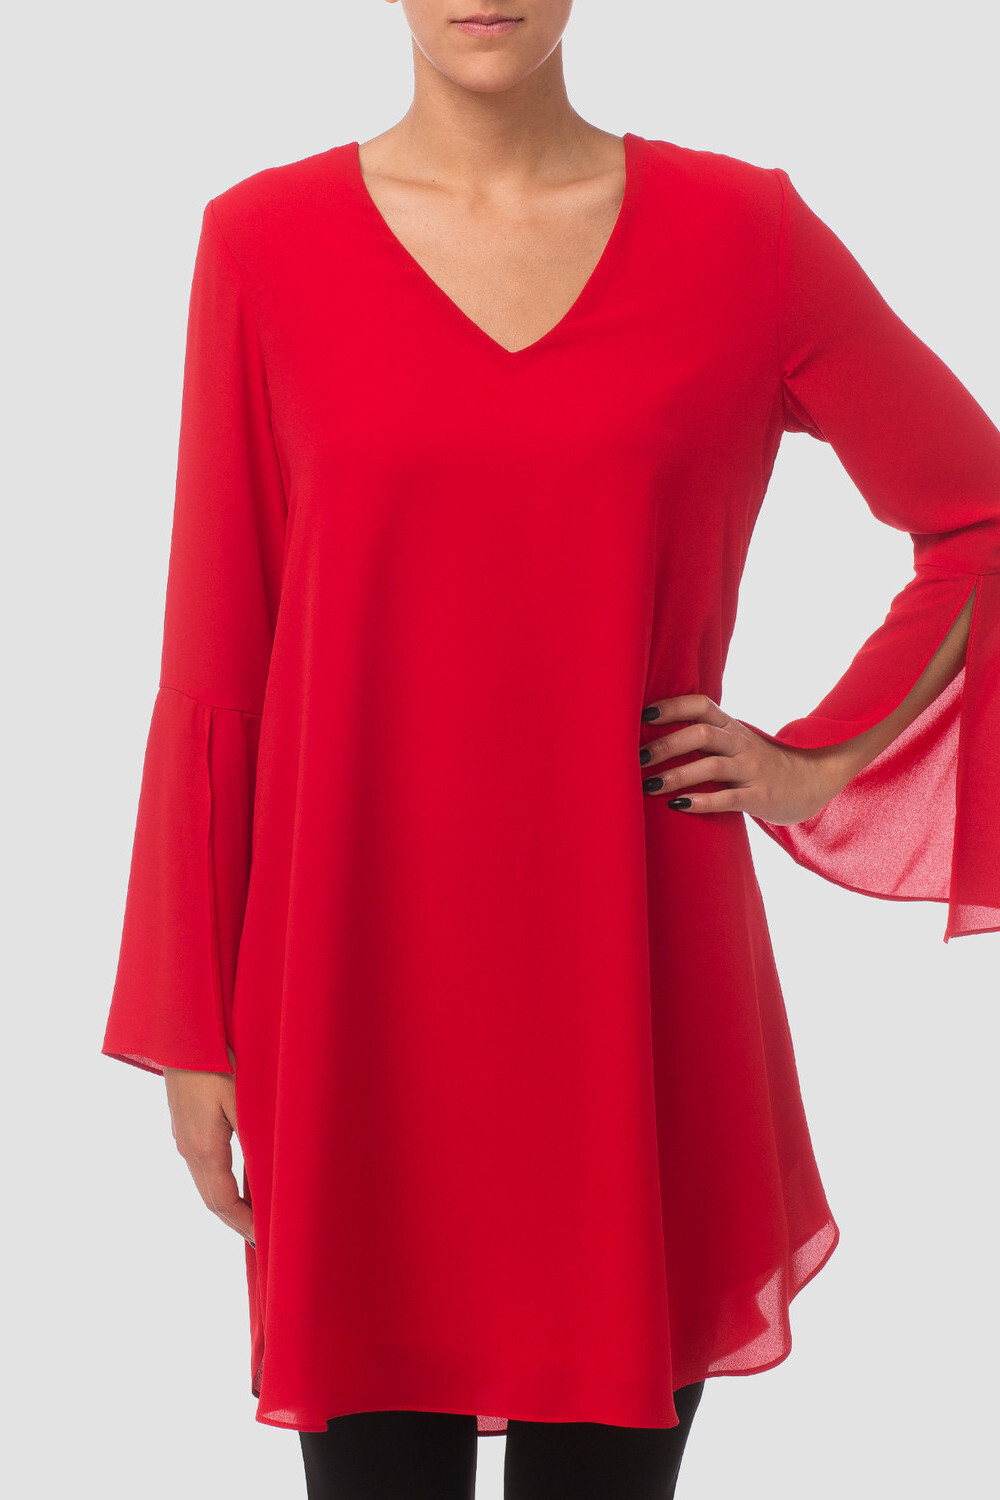 Joseph Ribkoff robe style 173259. Rouge A Levres 173